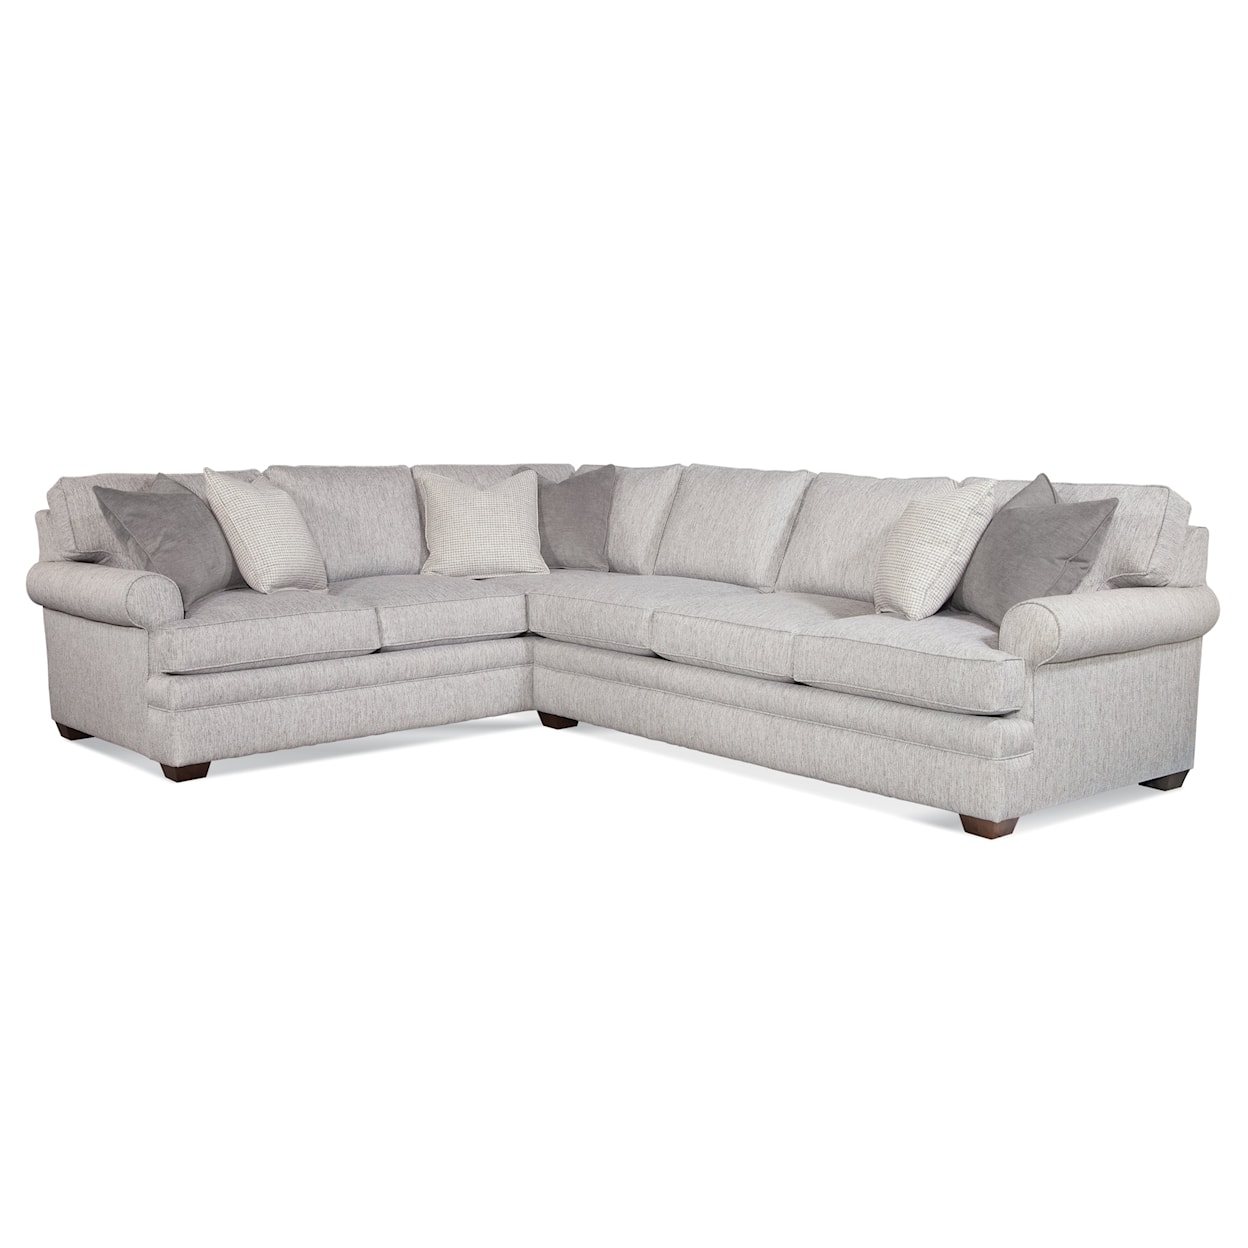 Braxton Culler Kensington Two-Piece Chaise Sectional